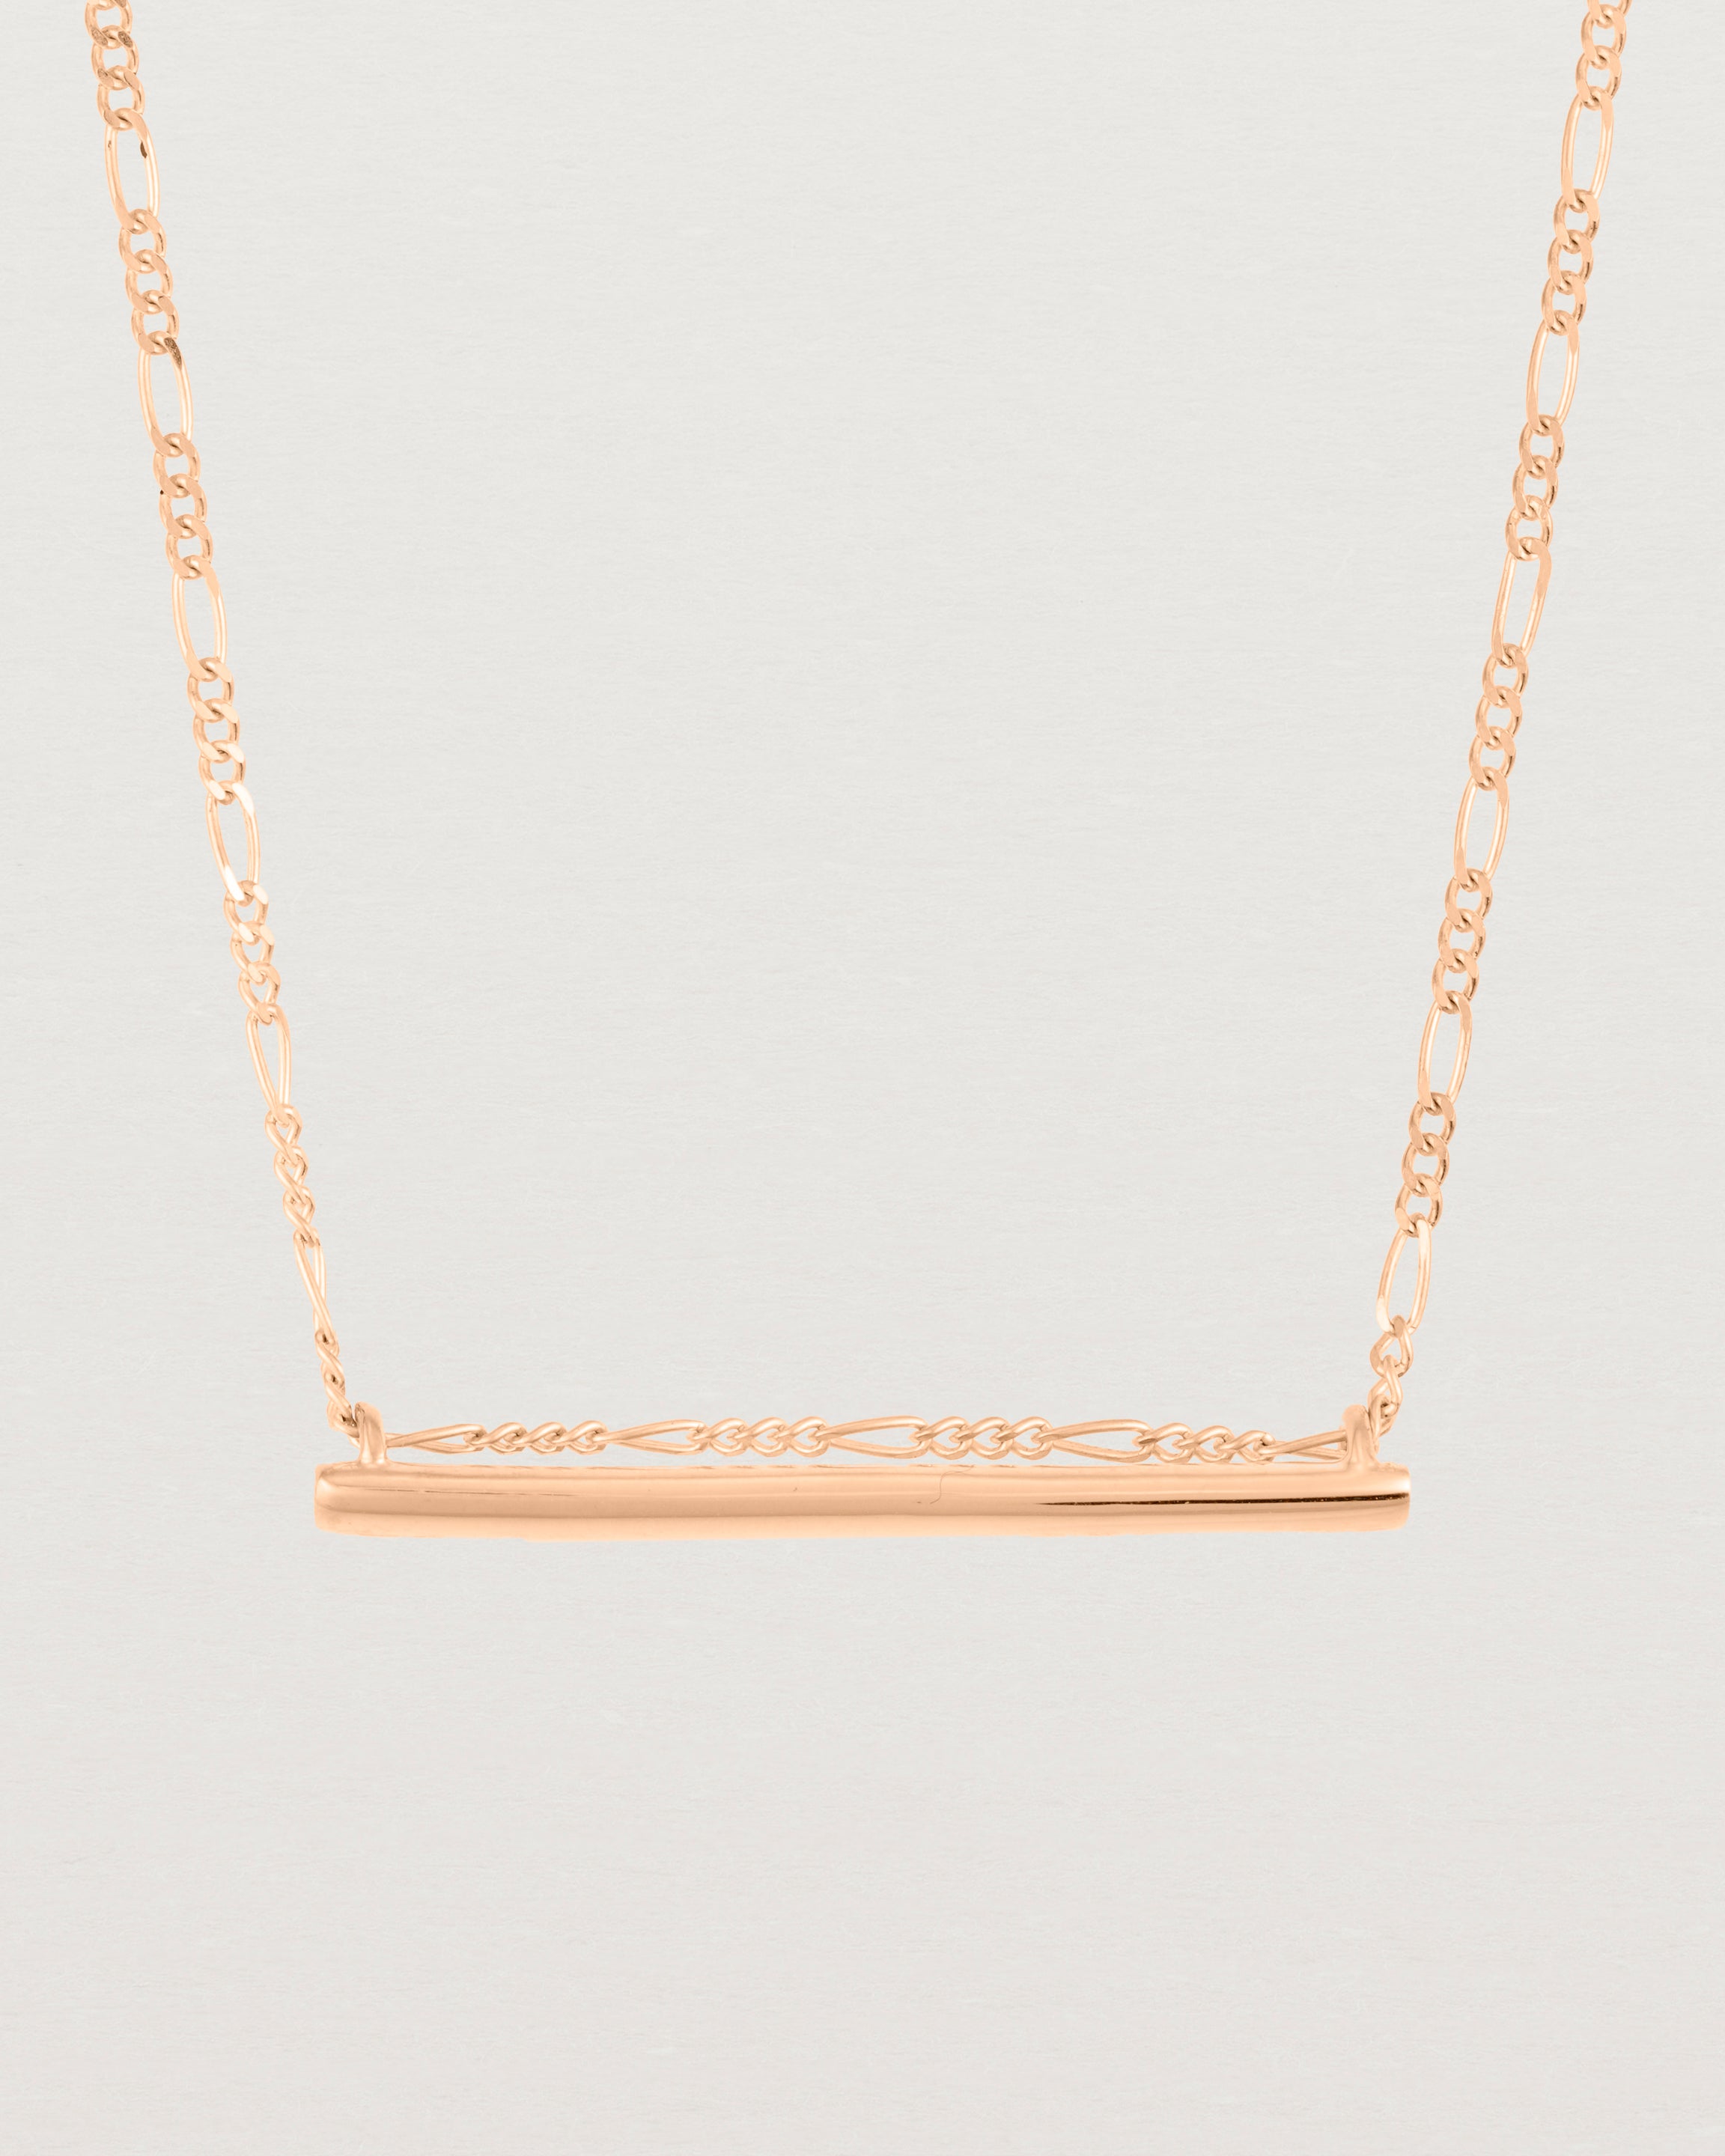 close up of Ellipse necklace with a rose gold bar hanging from a chain in rose gold